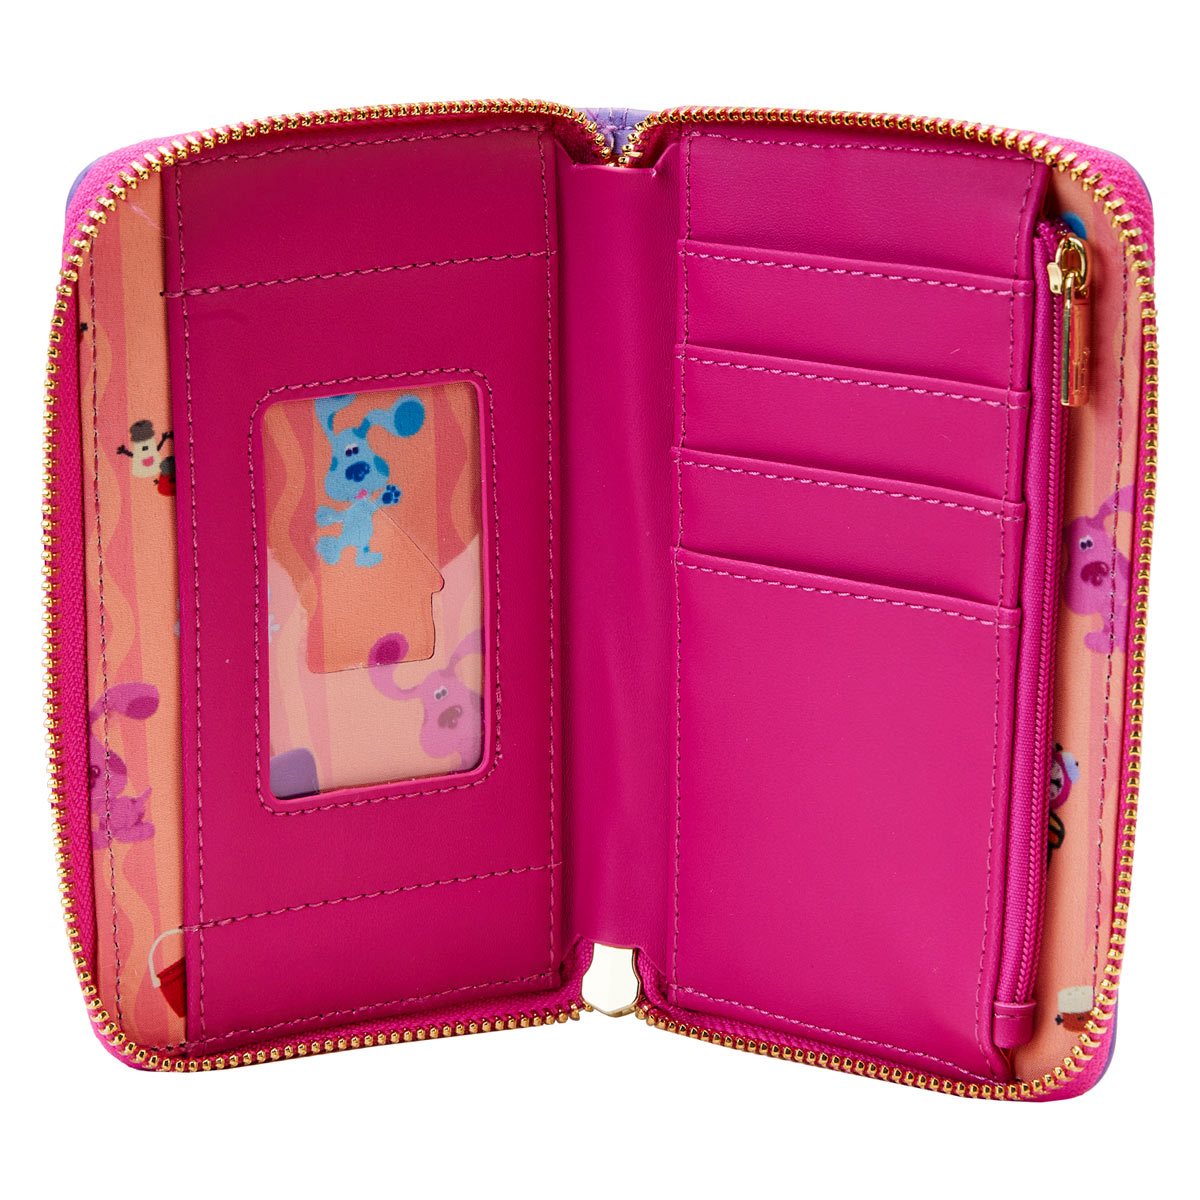 Blue's Clues Mail Time Zip-Around Wallet - Entertainment Earth